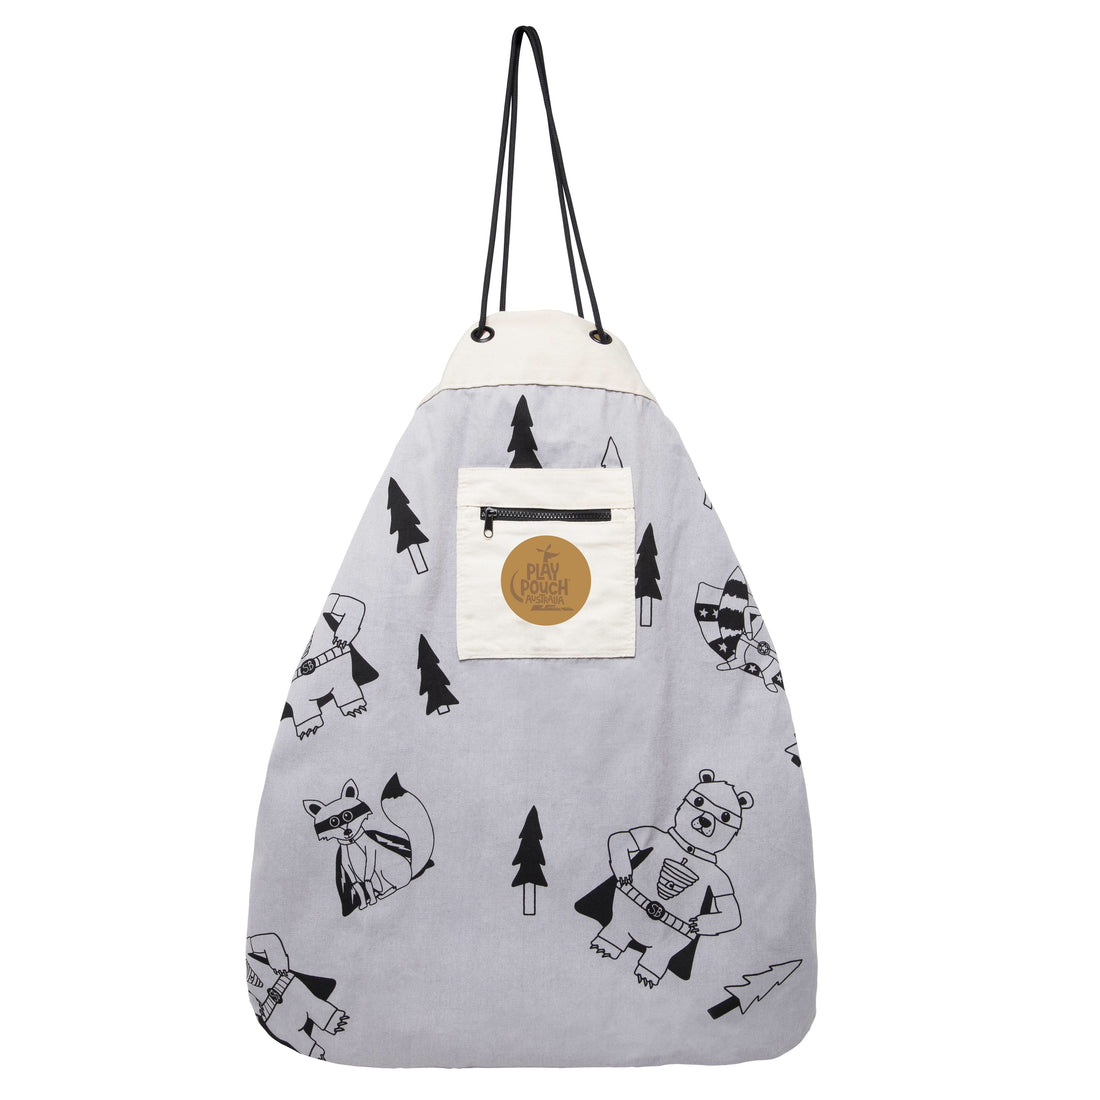 Superbear & Friends Printed Play Pouch